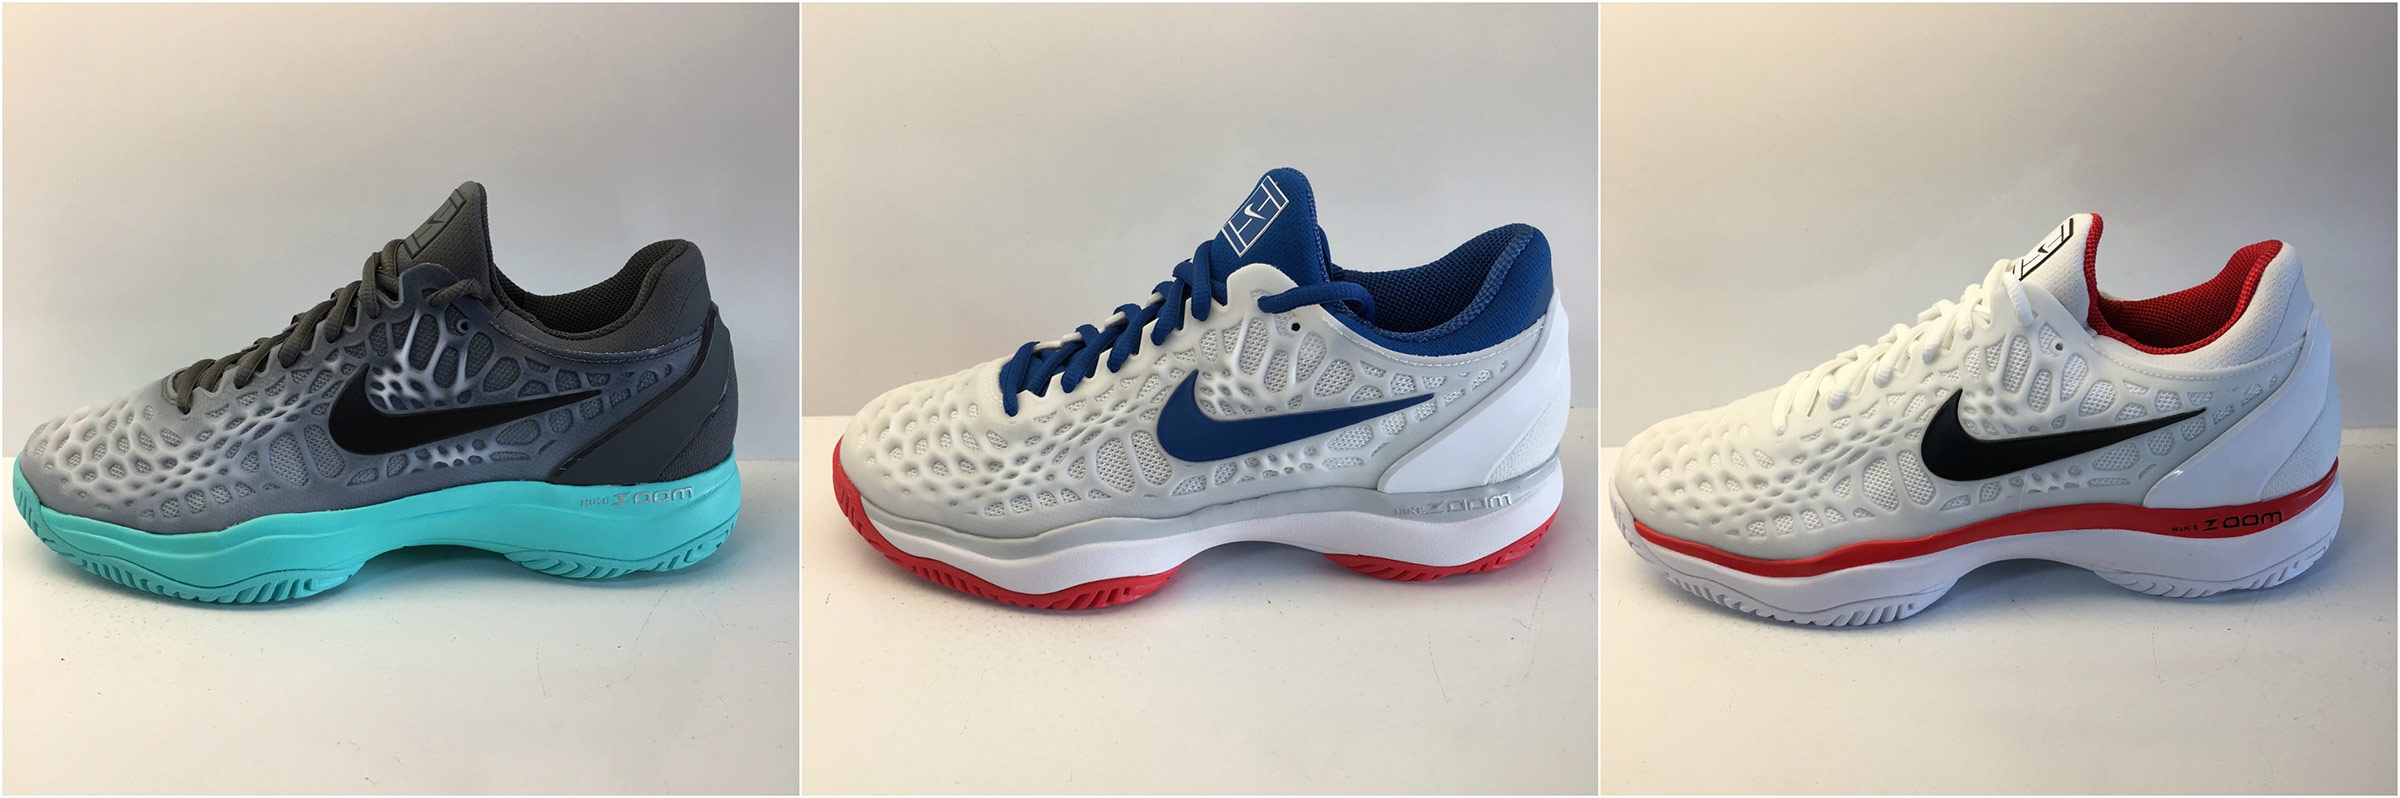 Stuwkracht Uitgaven Inspectie Product Spotlight: Nike Zoom Cage 3 – First Serve Tennis